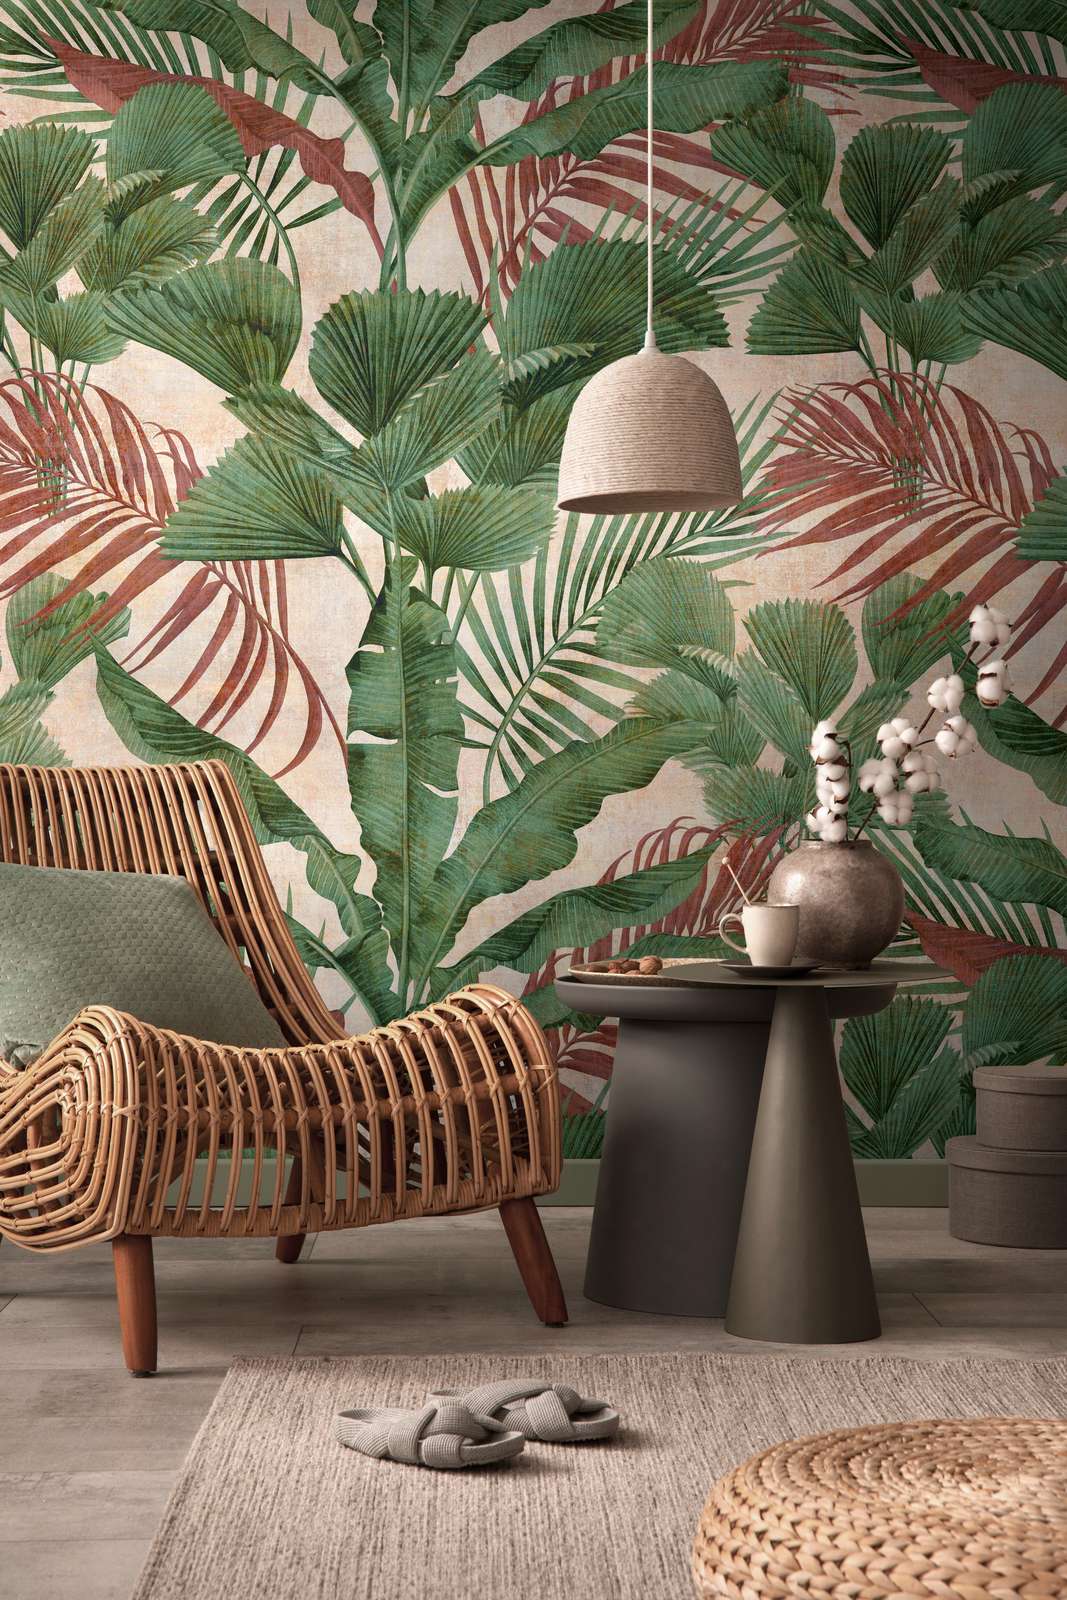             Jungle wallpaper with tropical plants - green, beige, red
        